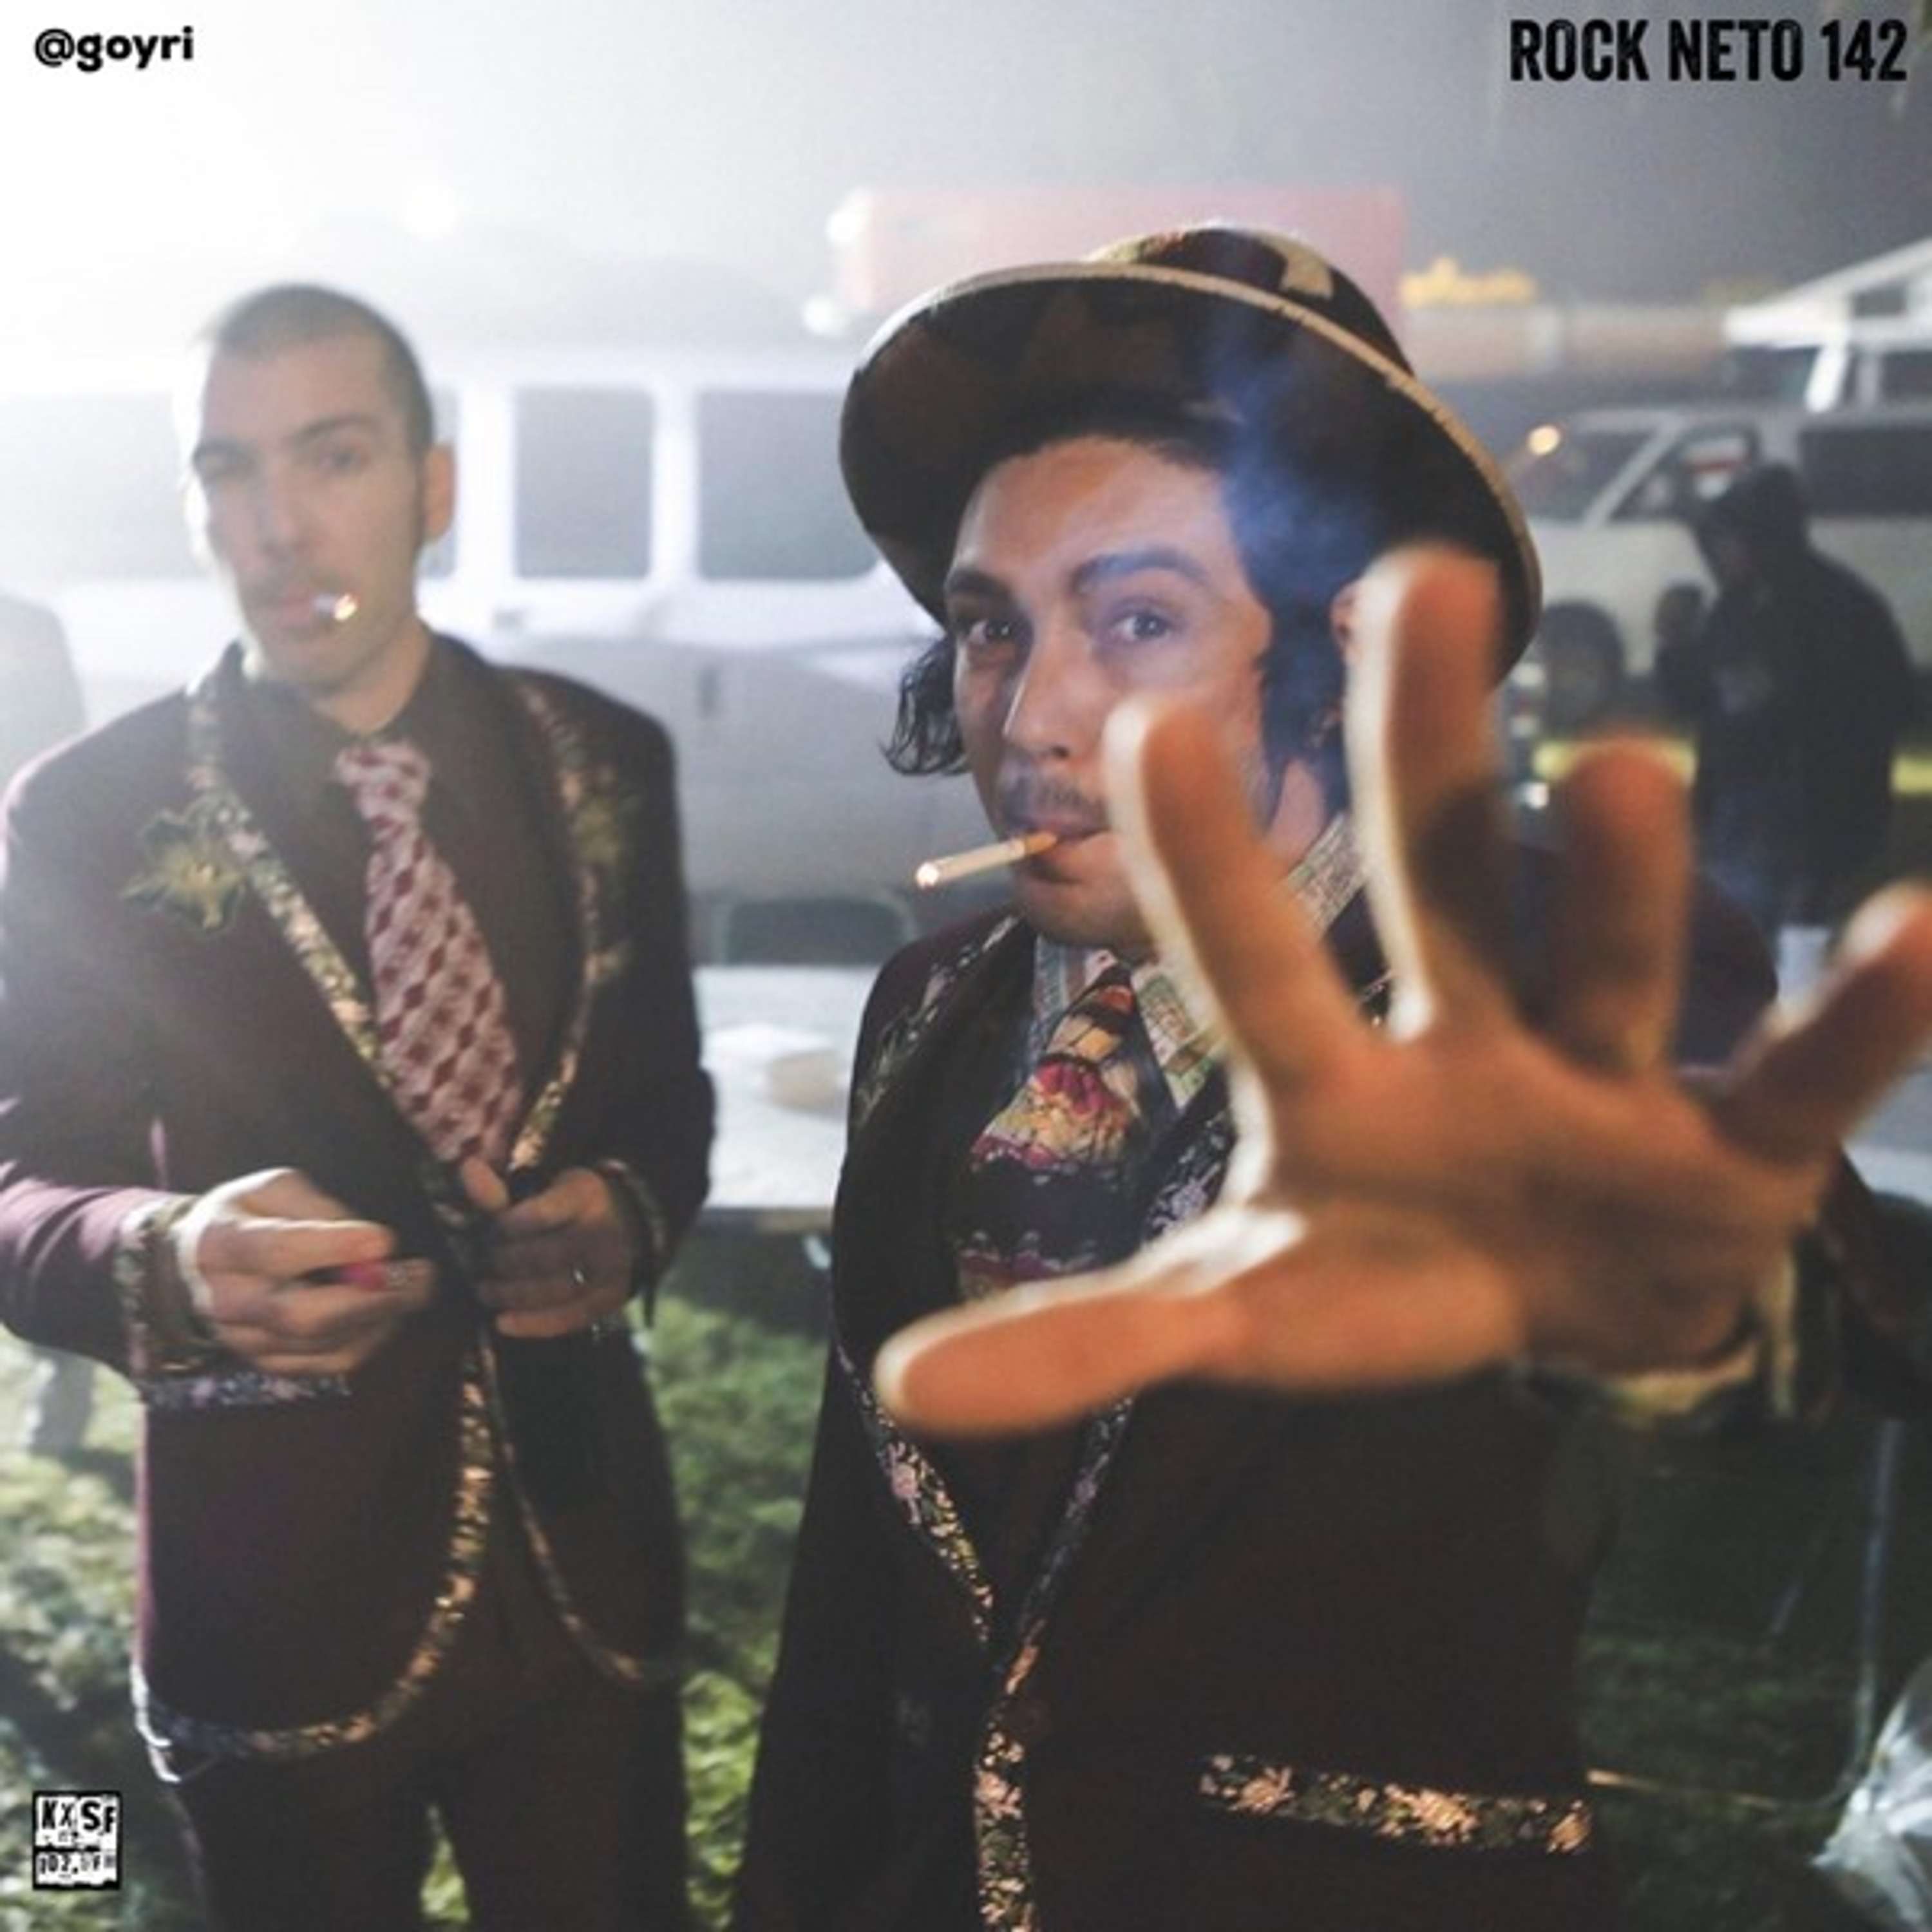 Rock Neto. Interview with Brooks Nielsen from The Growlers.